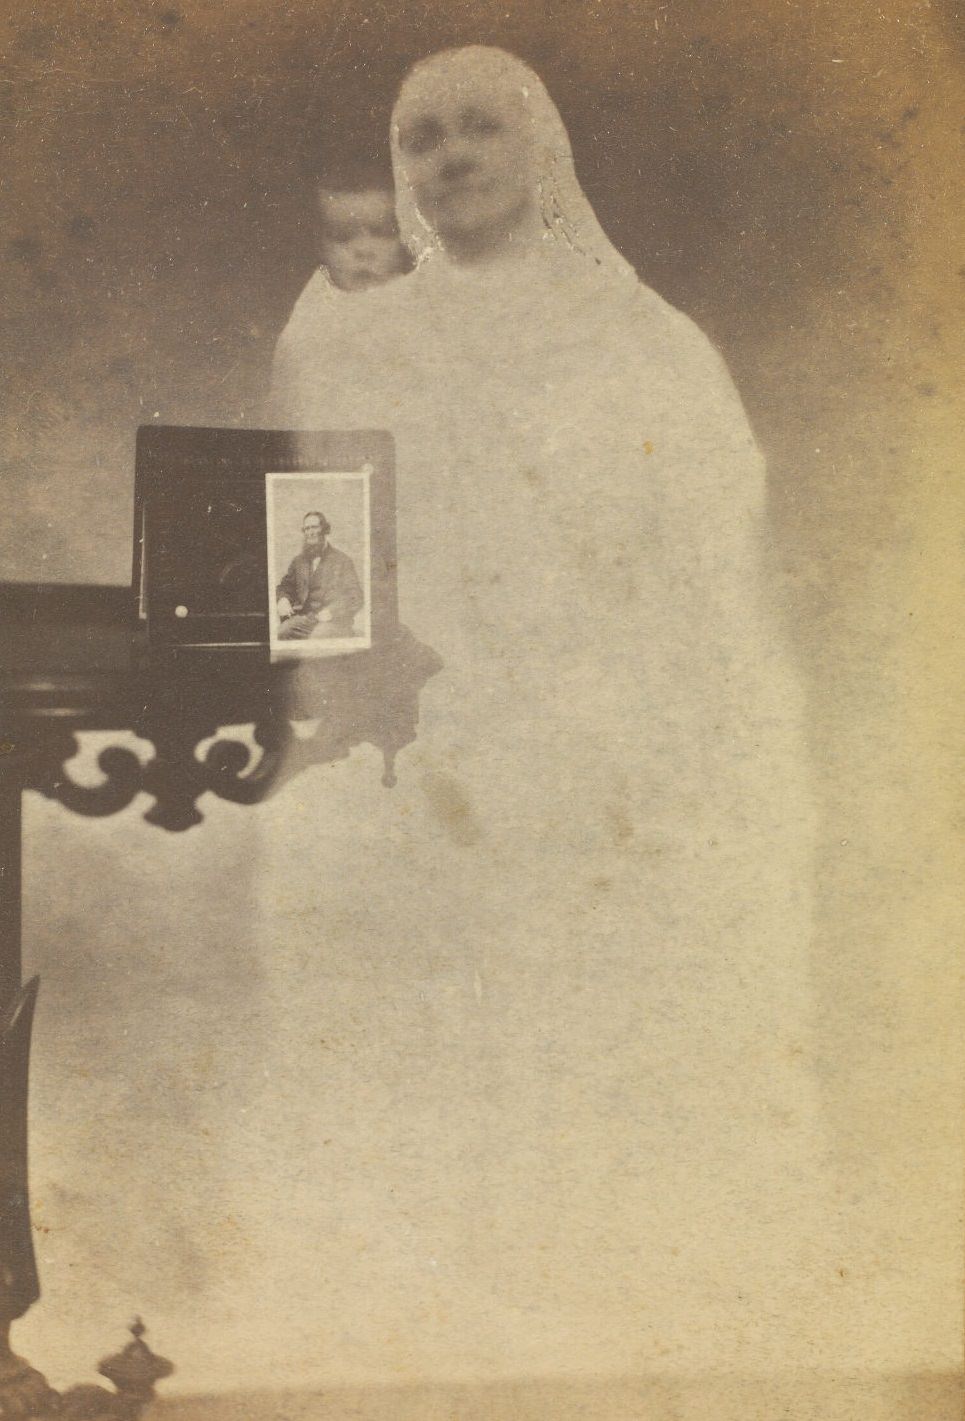 A portrait of Mr. Tinkham perched on a side table, with the faint image of a woman and baby next to it.